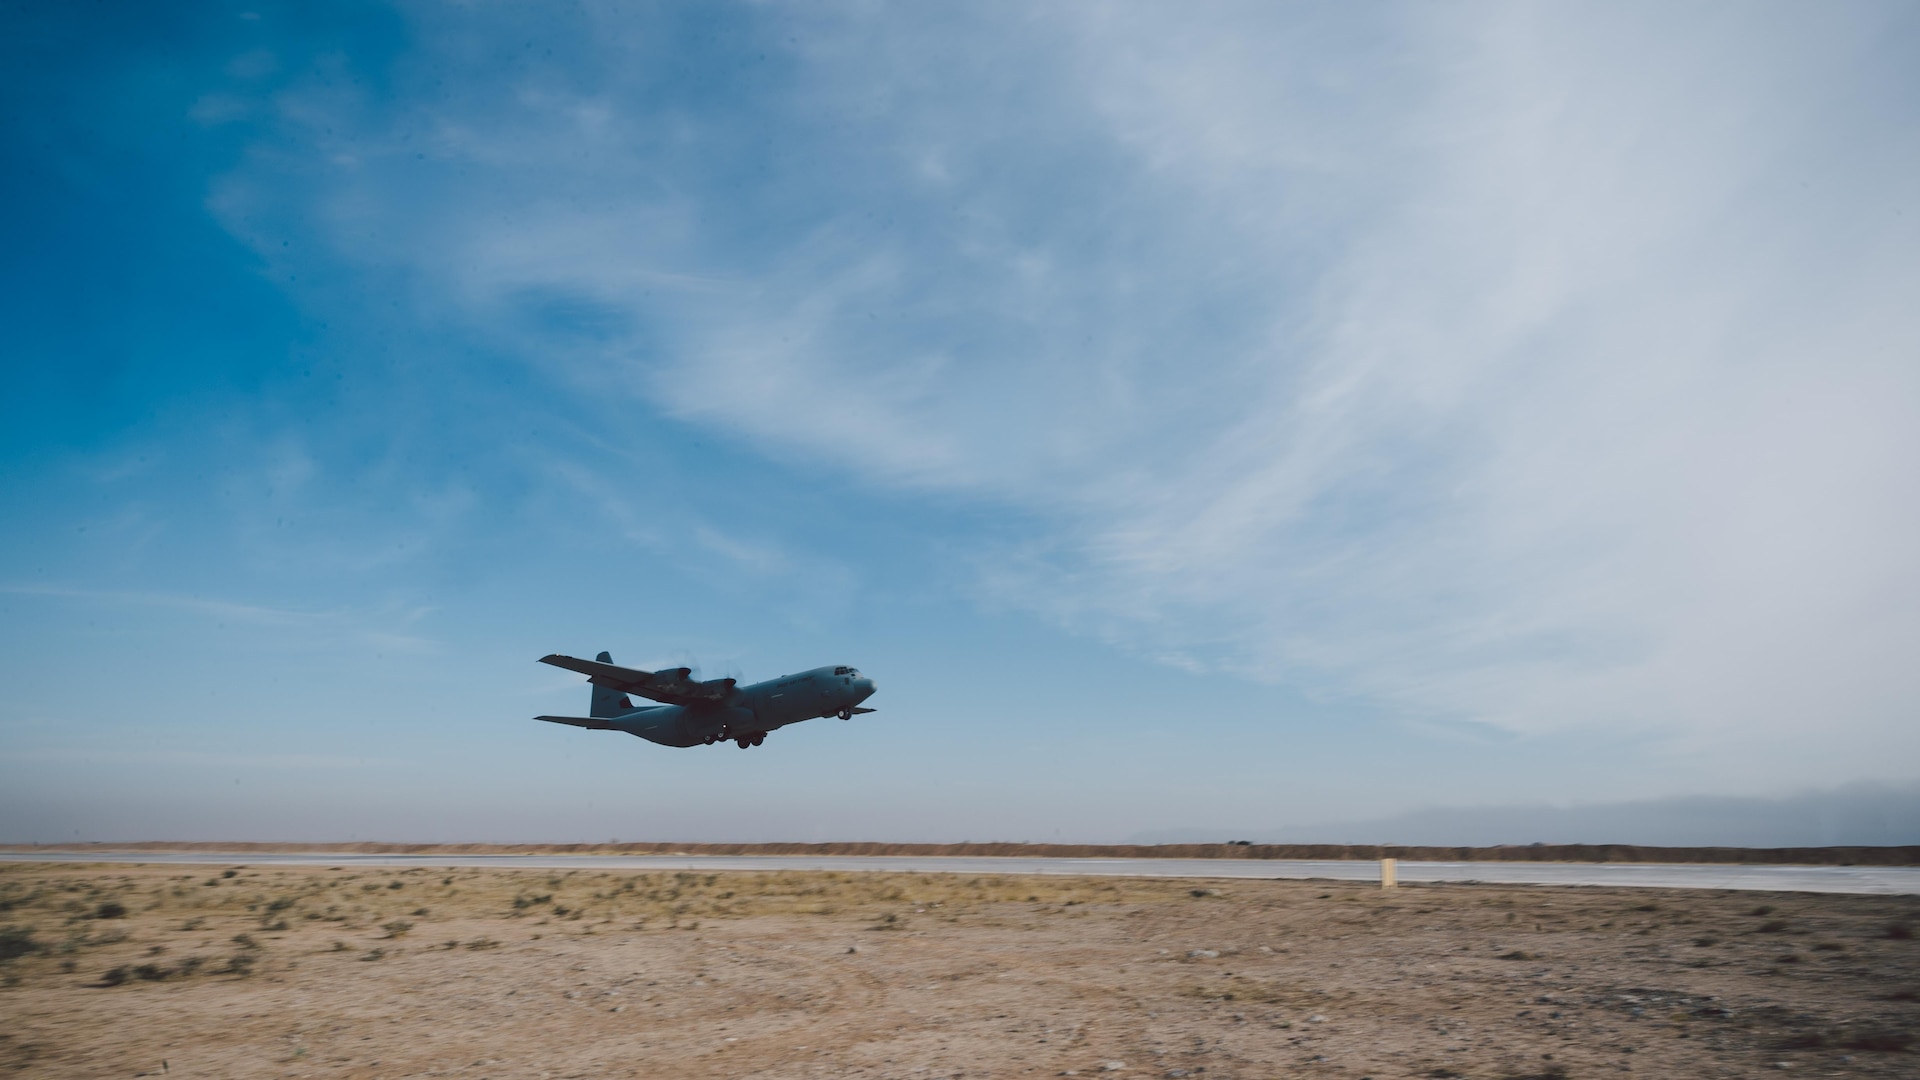 An Iraqi air force C-130 departs from Qayyarah West Airfield, Iraq, after delivering personnel and cargo in support of Combined Joint Task Force - Operation Inherent Resolve, Nov. 13, 2016. The airfield at Qayyarah West was recaptured from Da’esh by Iraqi forces in July 2016, and has been refurbished by Coalition engineers to allow the re-commencement of air operations. Qayyarah Airfield is now a vital logistical hub, opening an air corridor in support of the battle to liberate Mosul as well as operations throughout northern Iraq. (U.S. Air Force photo by Senior Airman Jordan Castelan)

